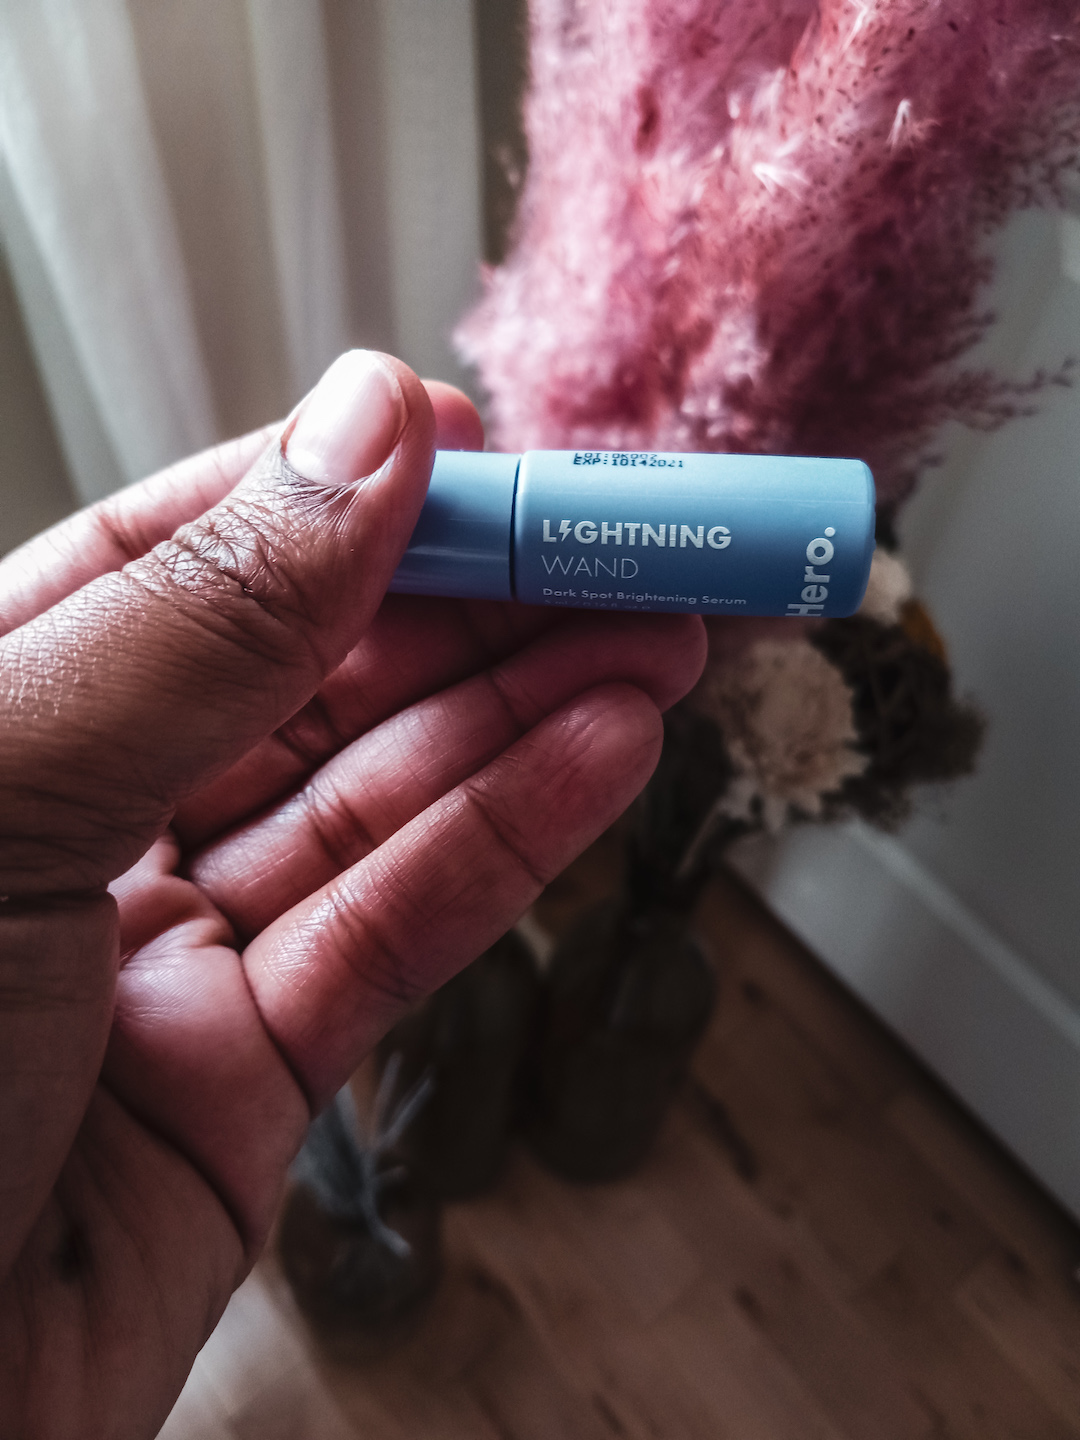 Blogger Rogan Smith holds a small rollerball of Hero's dark spot remover in her hand. The Lightning Wand promises to remove dark spots quickly.